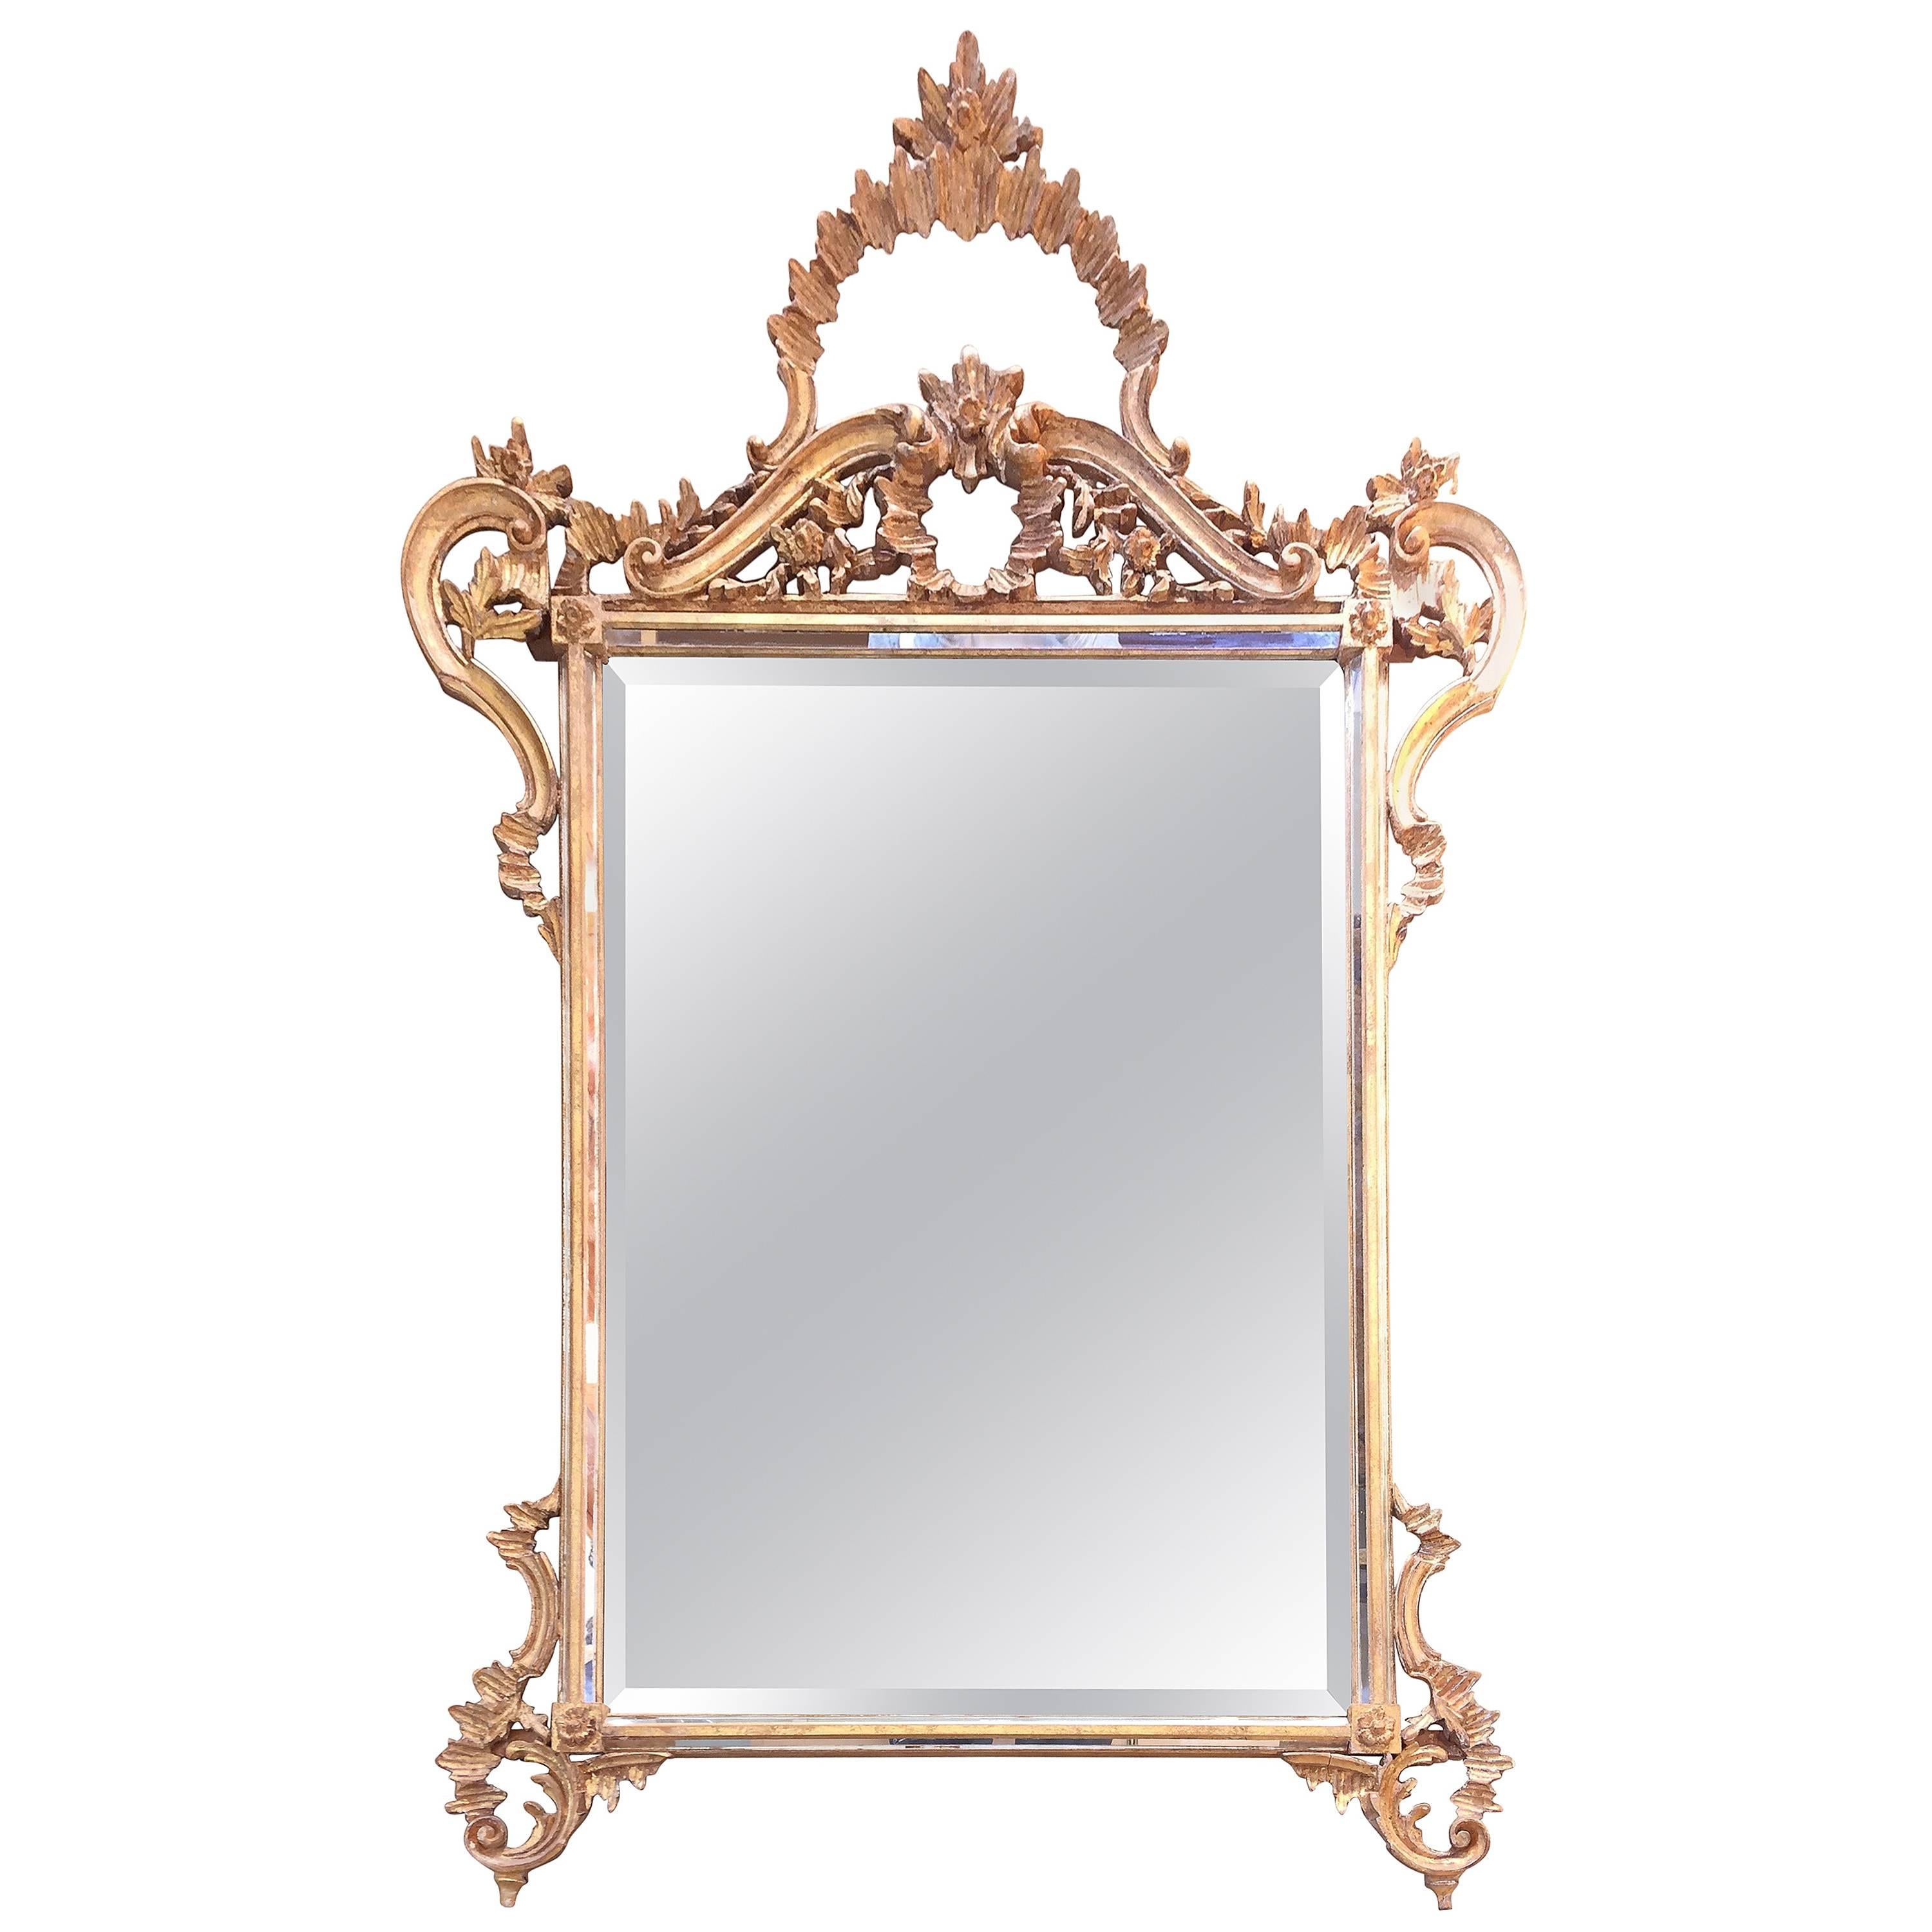 Lovely large fancy giltwood mirror having bevelled mirror and inset mirror detailing around the inside edges with elegant Italian giltwood frame.
33.25 W at bottom.